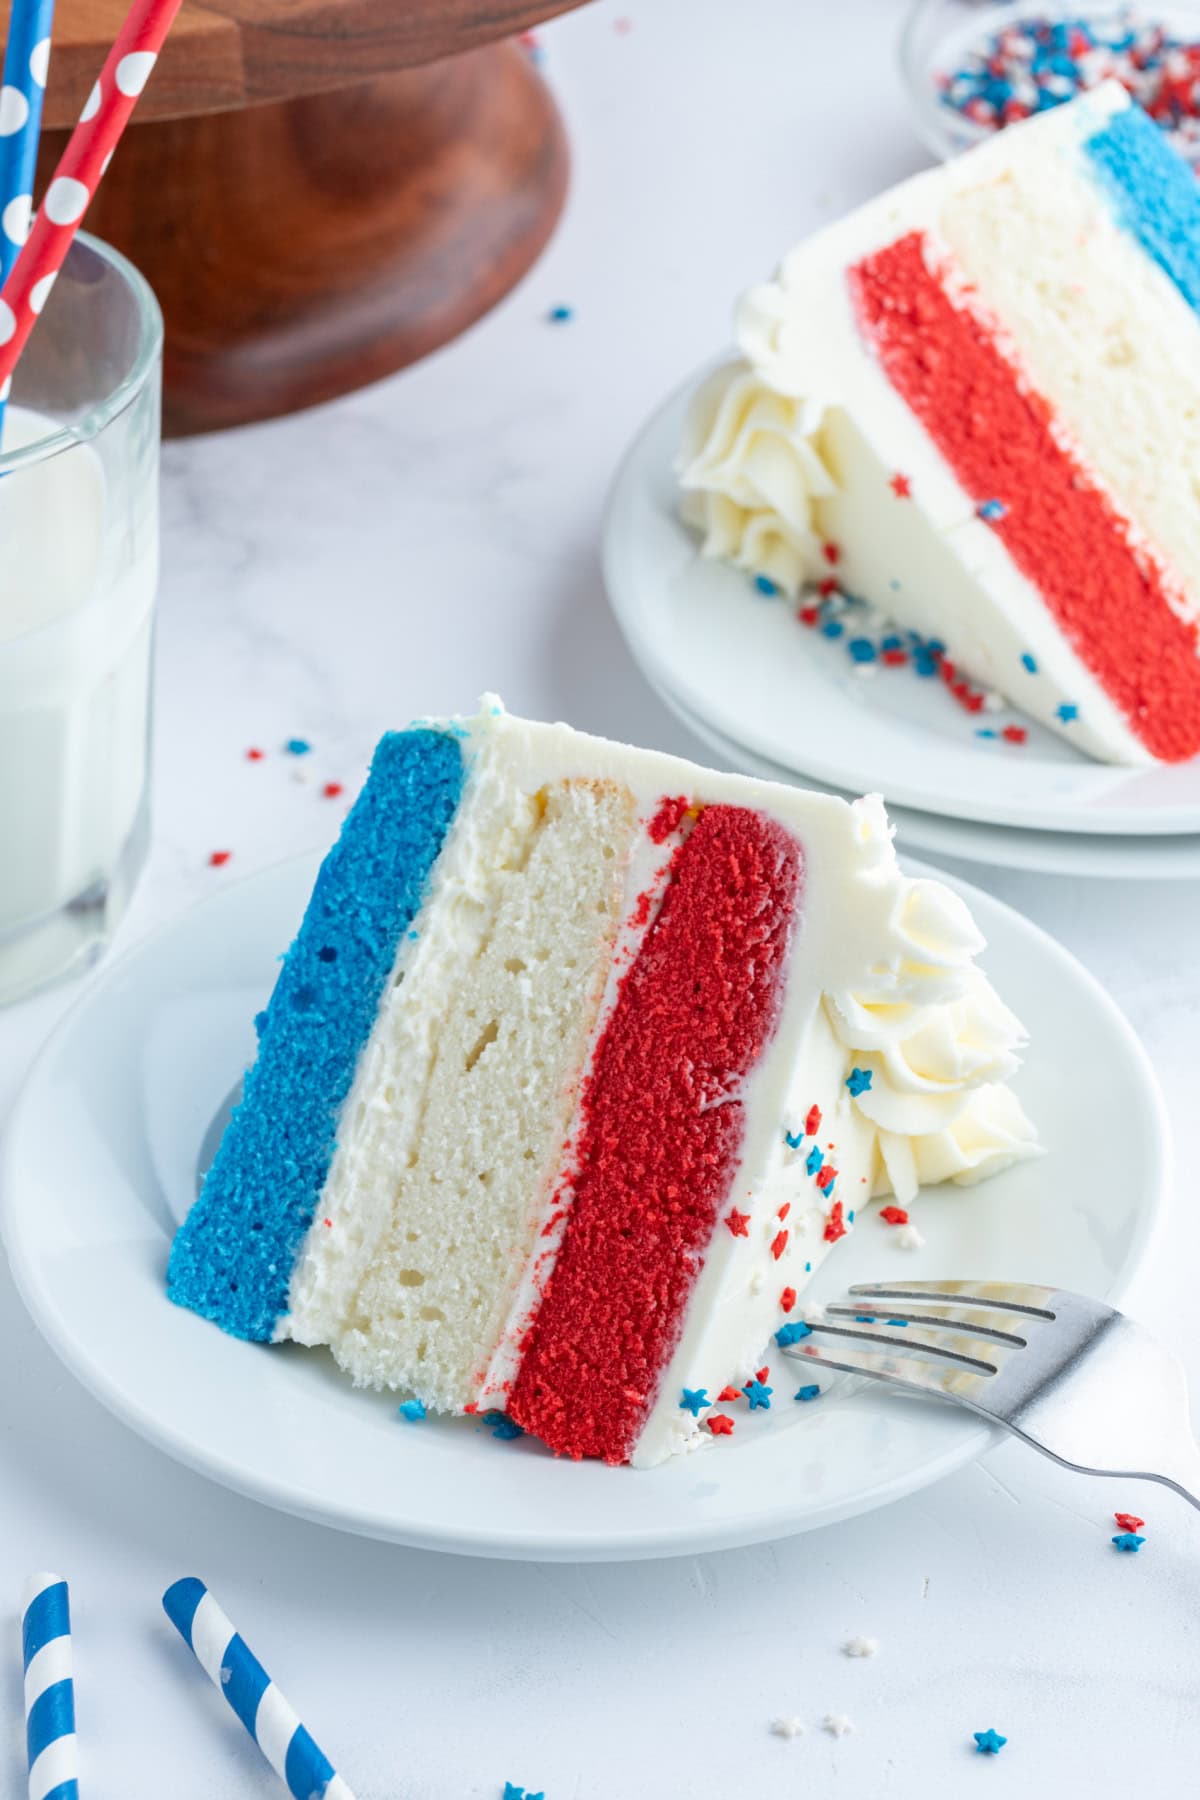 slice of red white and blue cake on plate